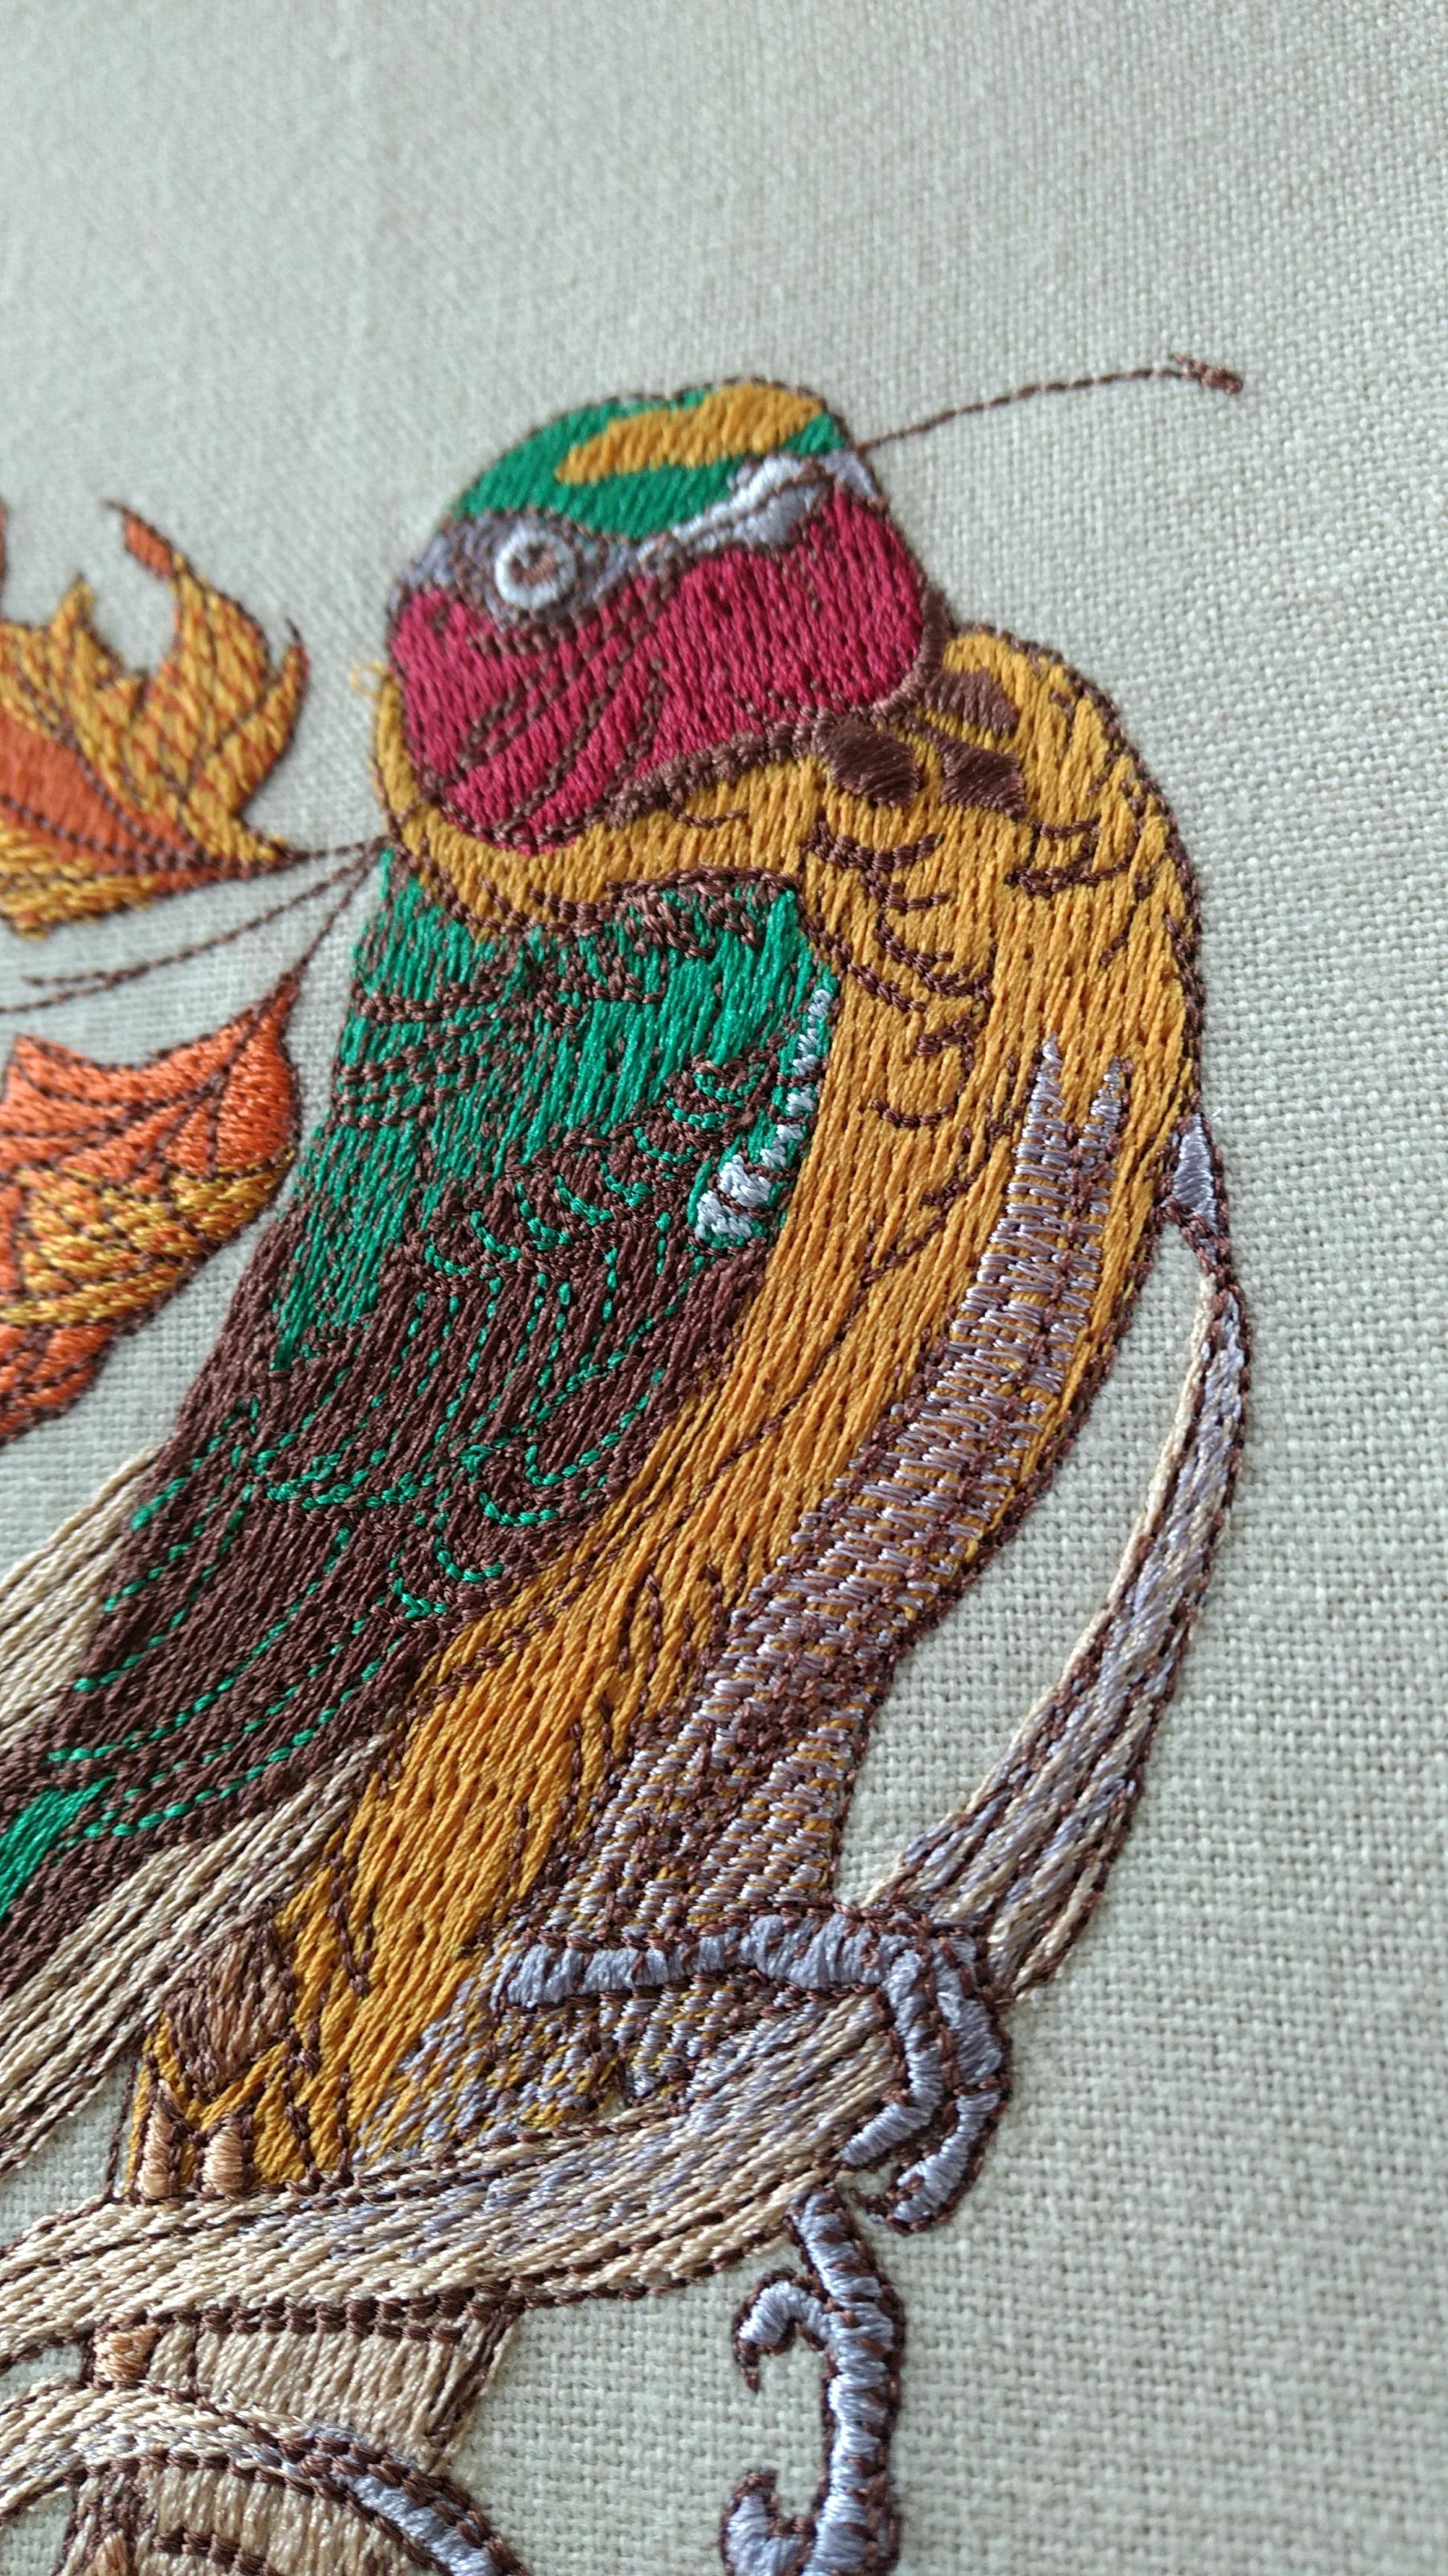 Colorful rubythroat embroidery design